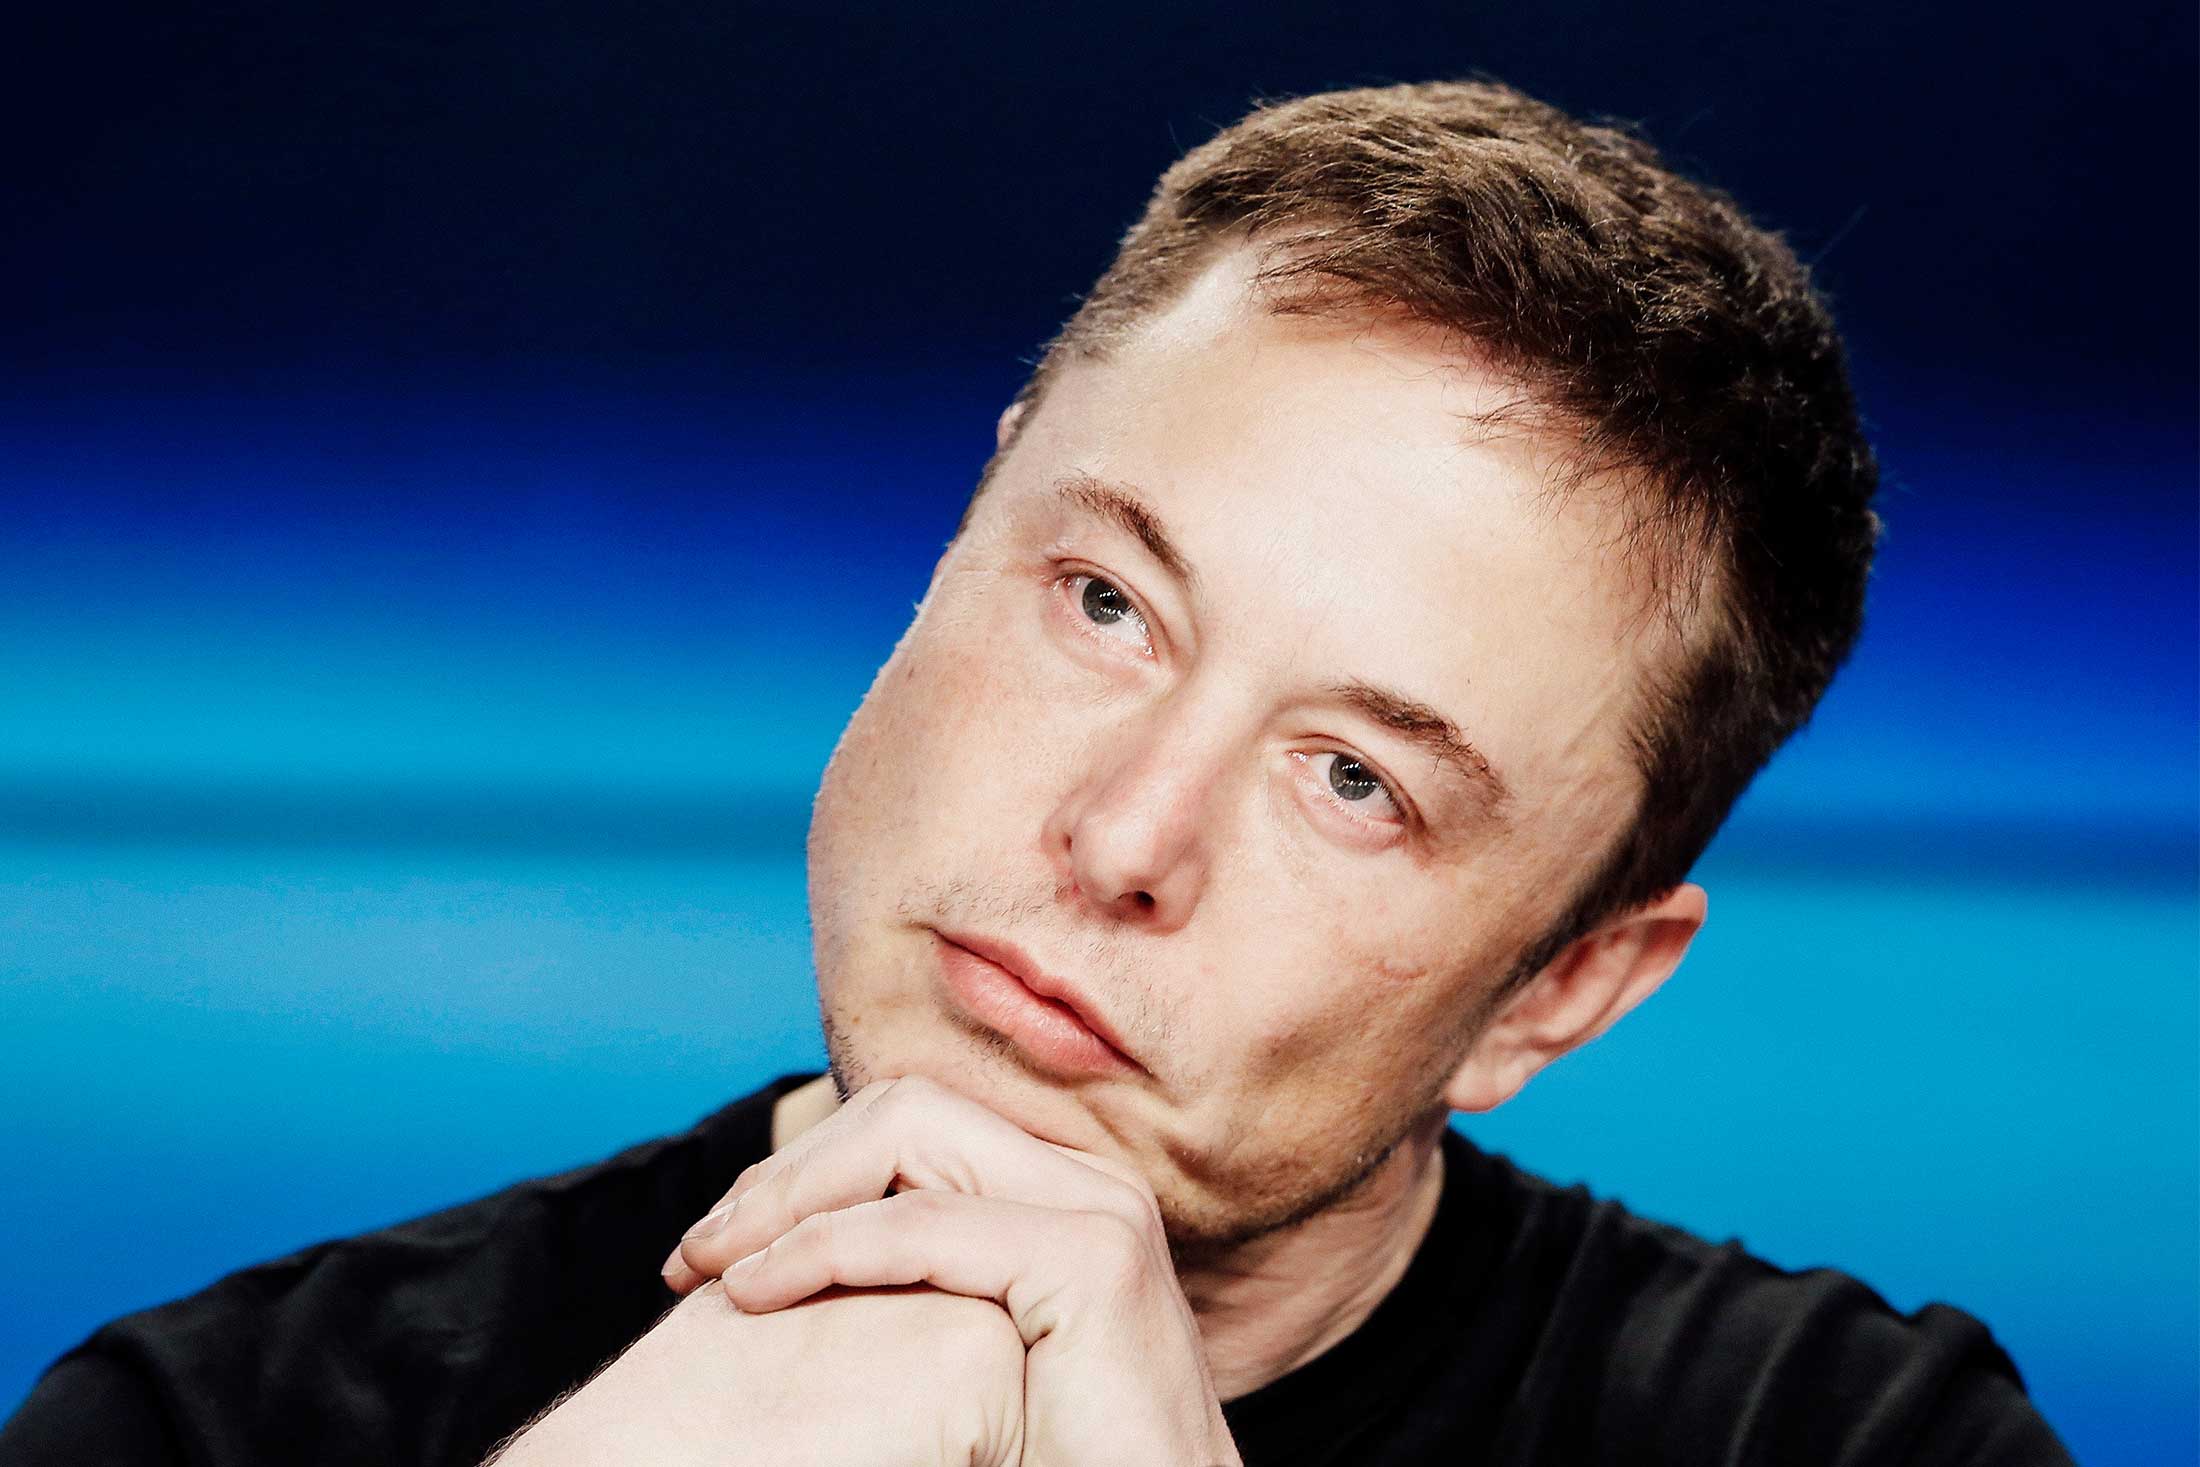 Elon Musk listens at a press conference following the first launch of a SpaceX Falcon Heavy rocket at the Kennedy Space Center in Cape Canaveral, Florida, on Feb. 6.